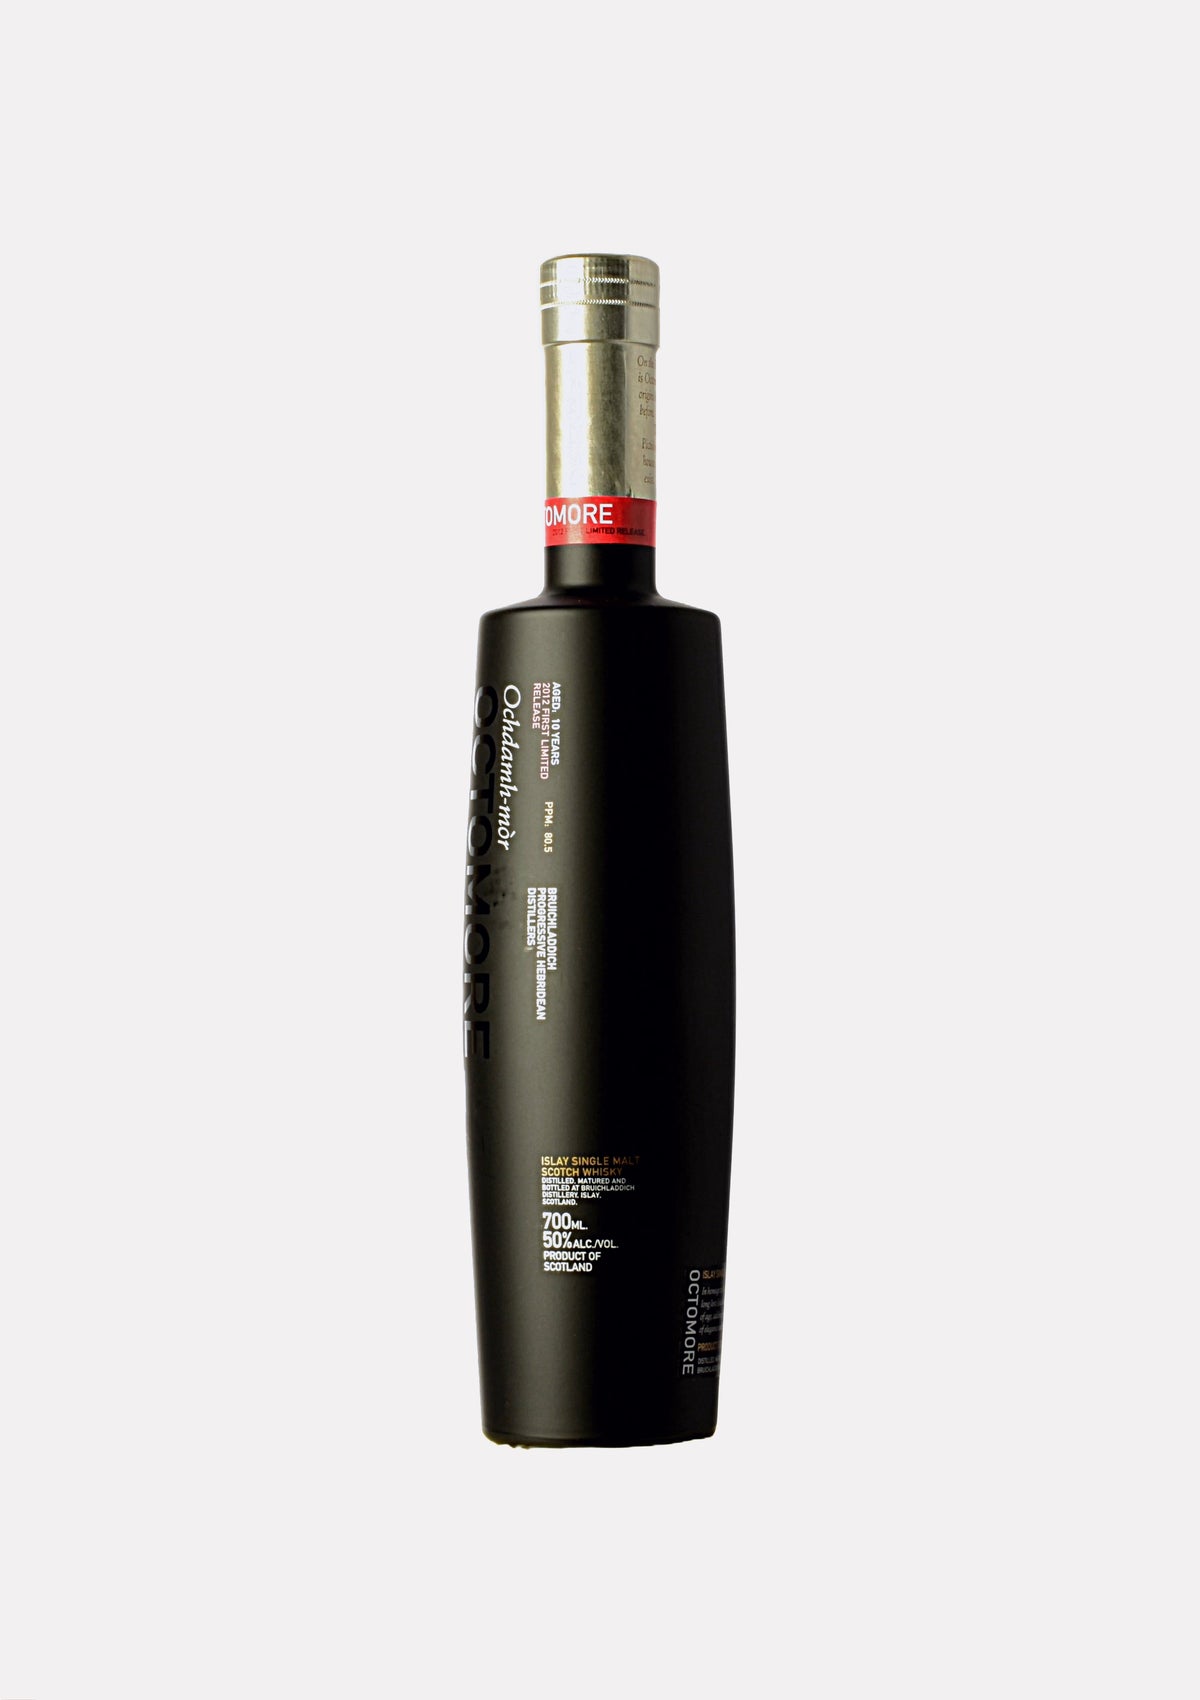 Octomore 2012 First Limited Release 80.5 ppm 10 Jahre